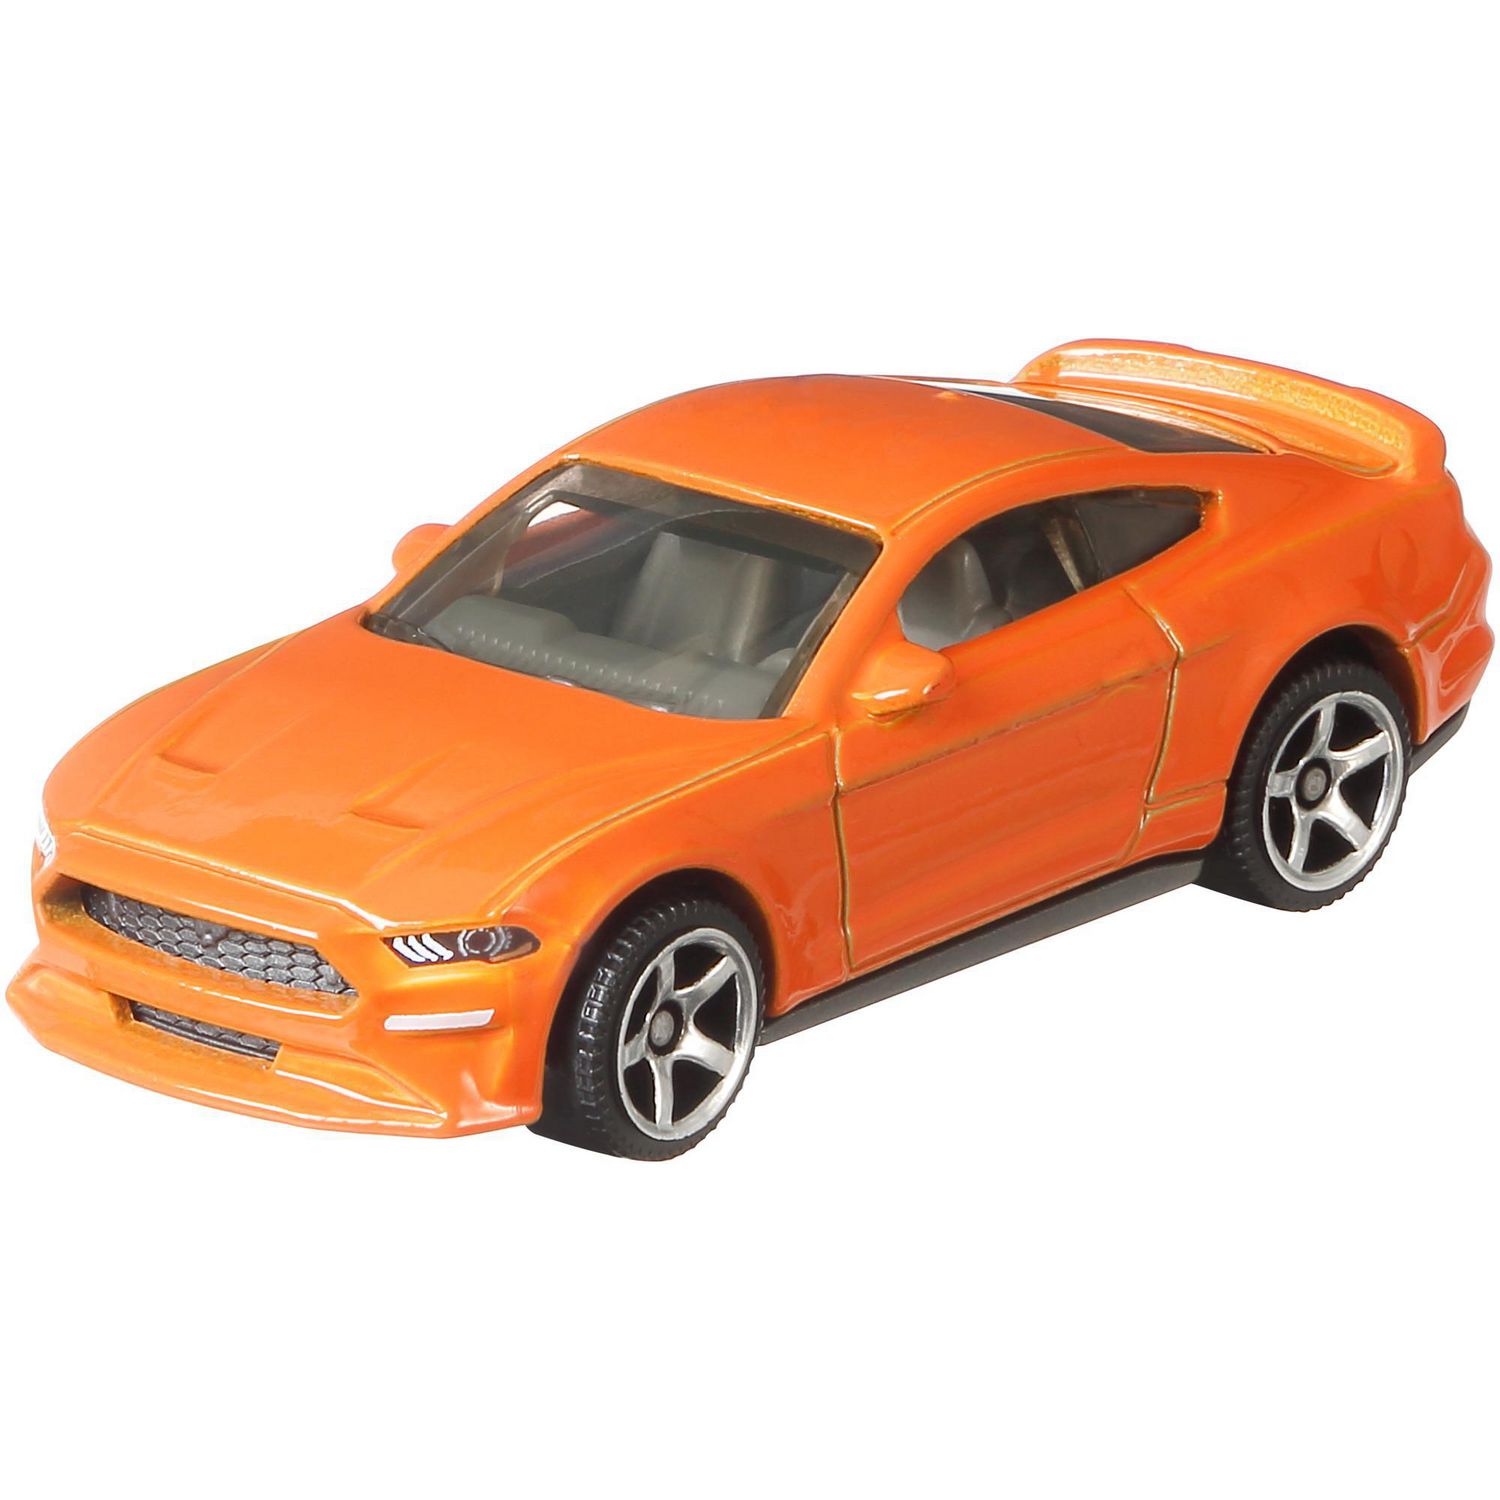 Matchbox '19 Ford Mustang Coupe Vehicle - Walmart.ca